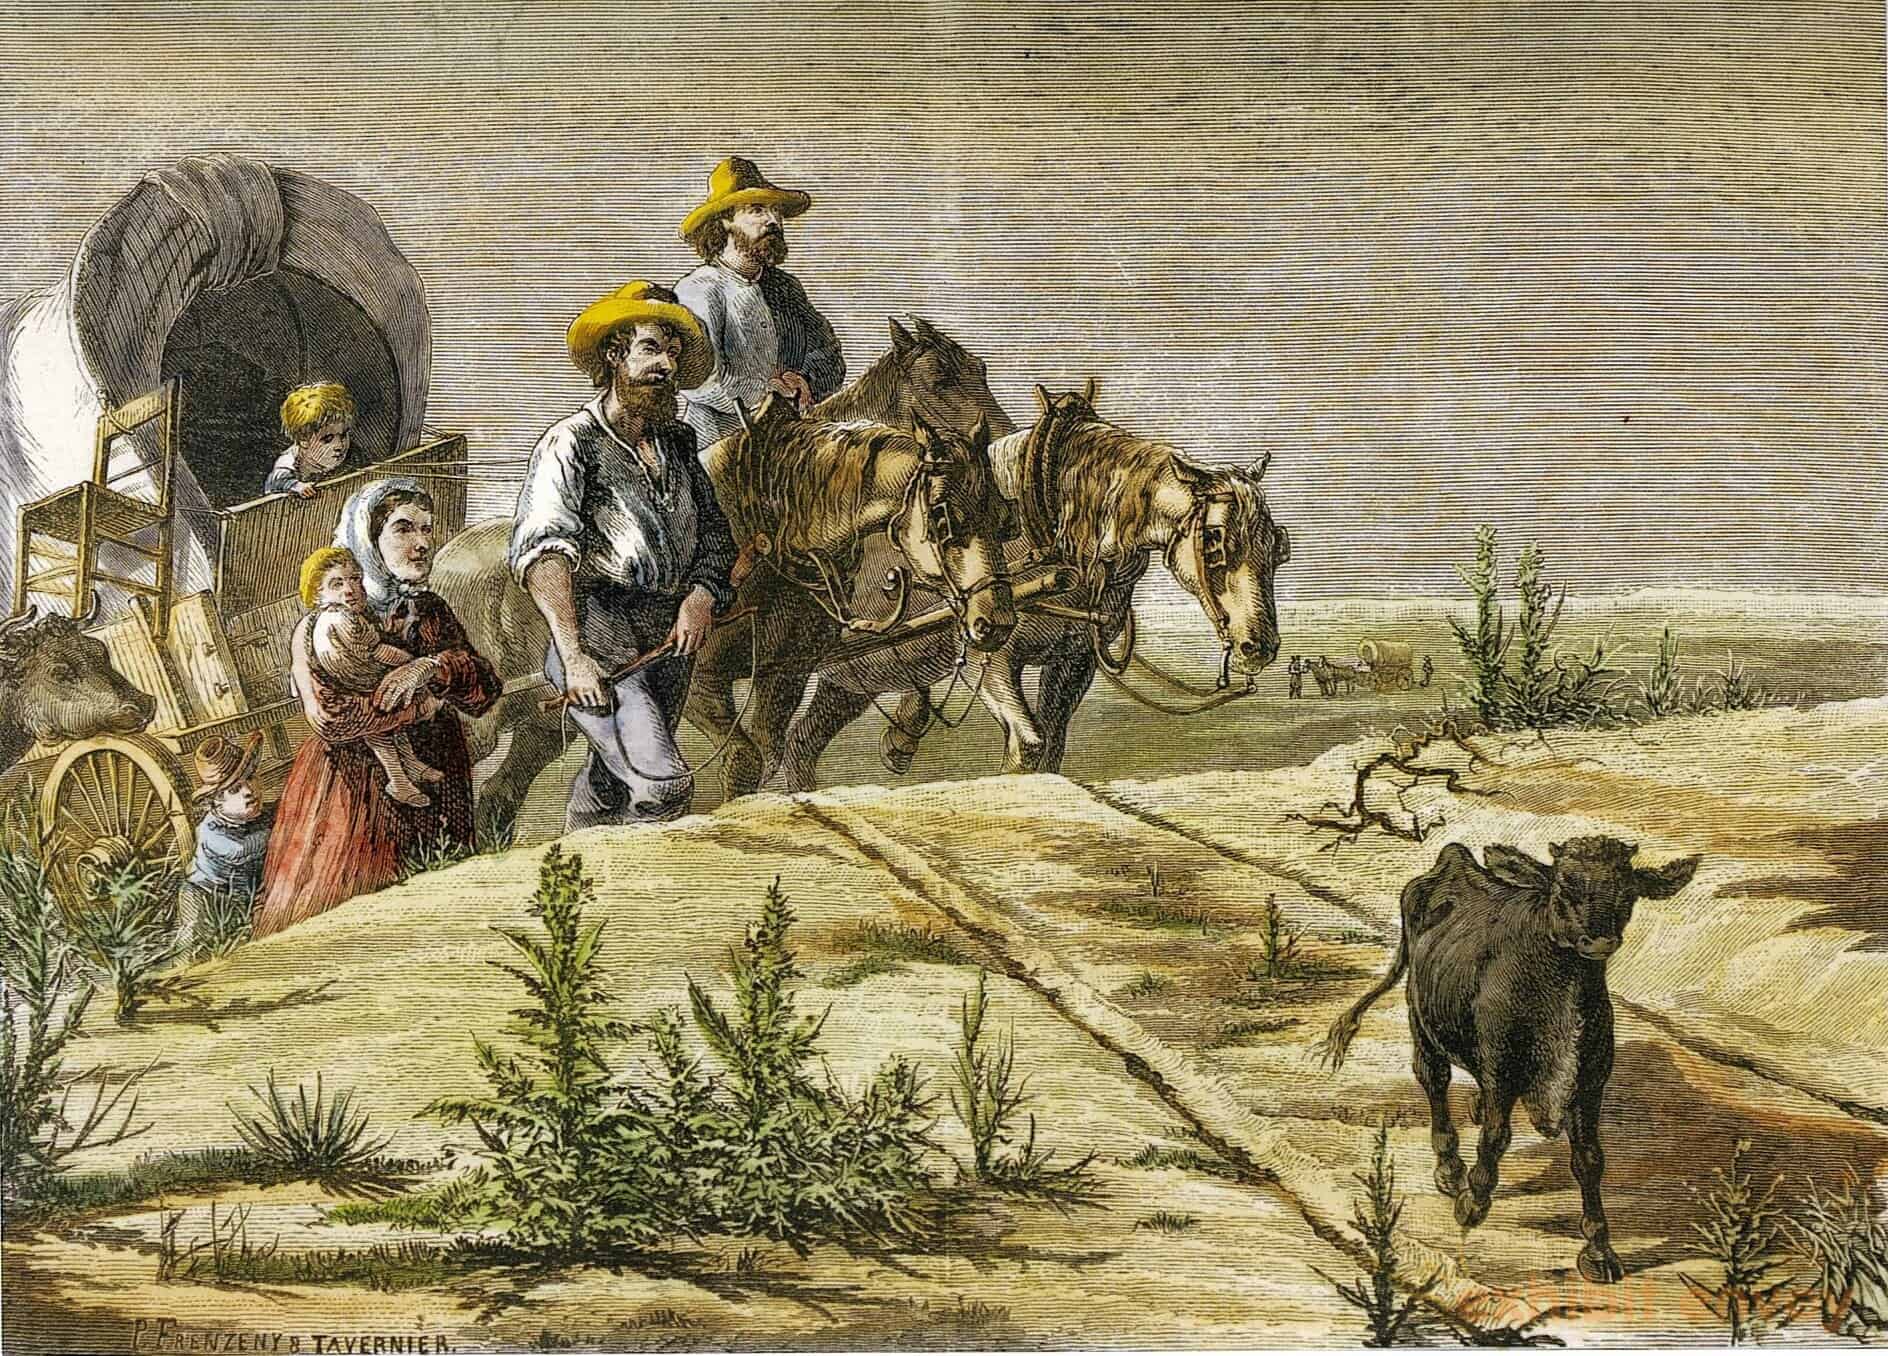 A Great Frontier Odyssey: Sketching the American West - Exhibit Envoy